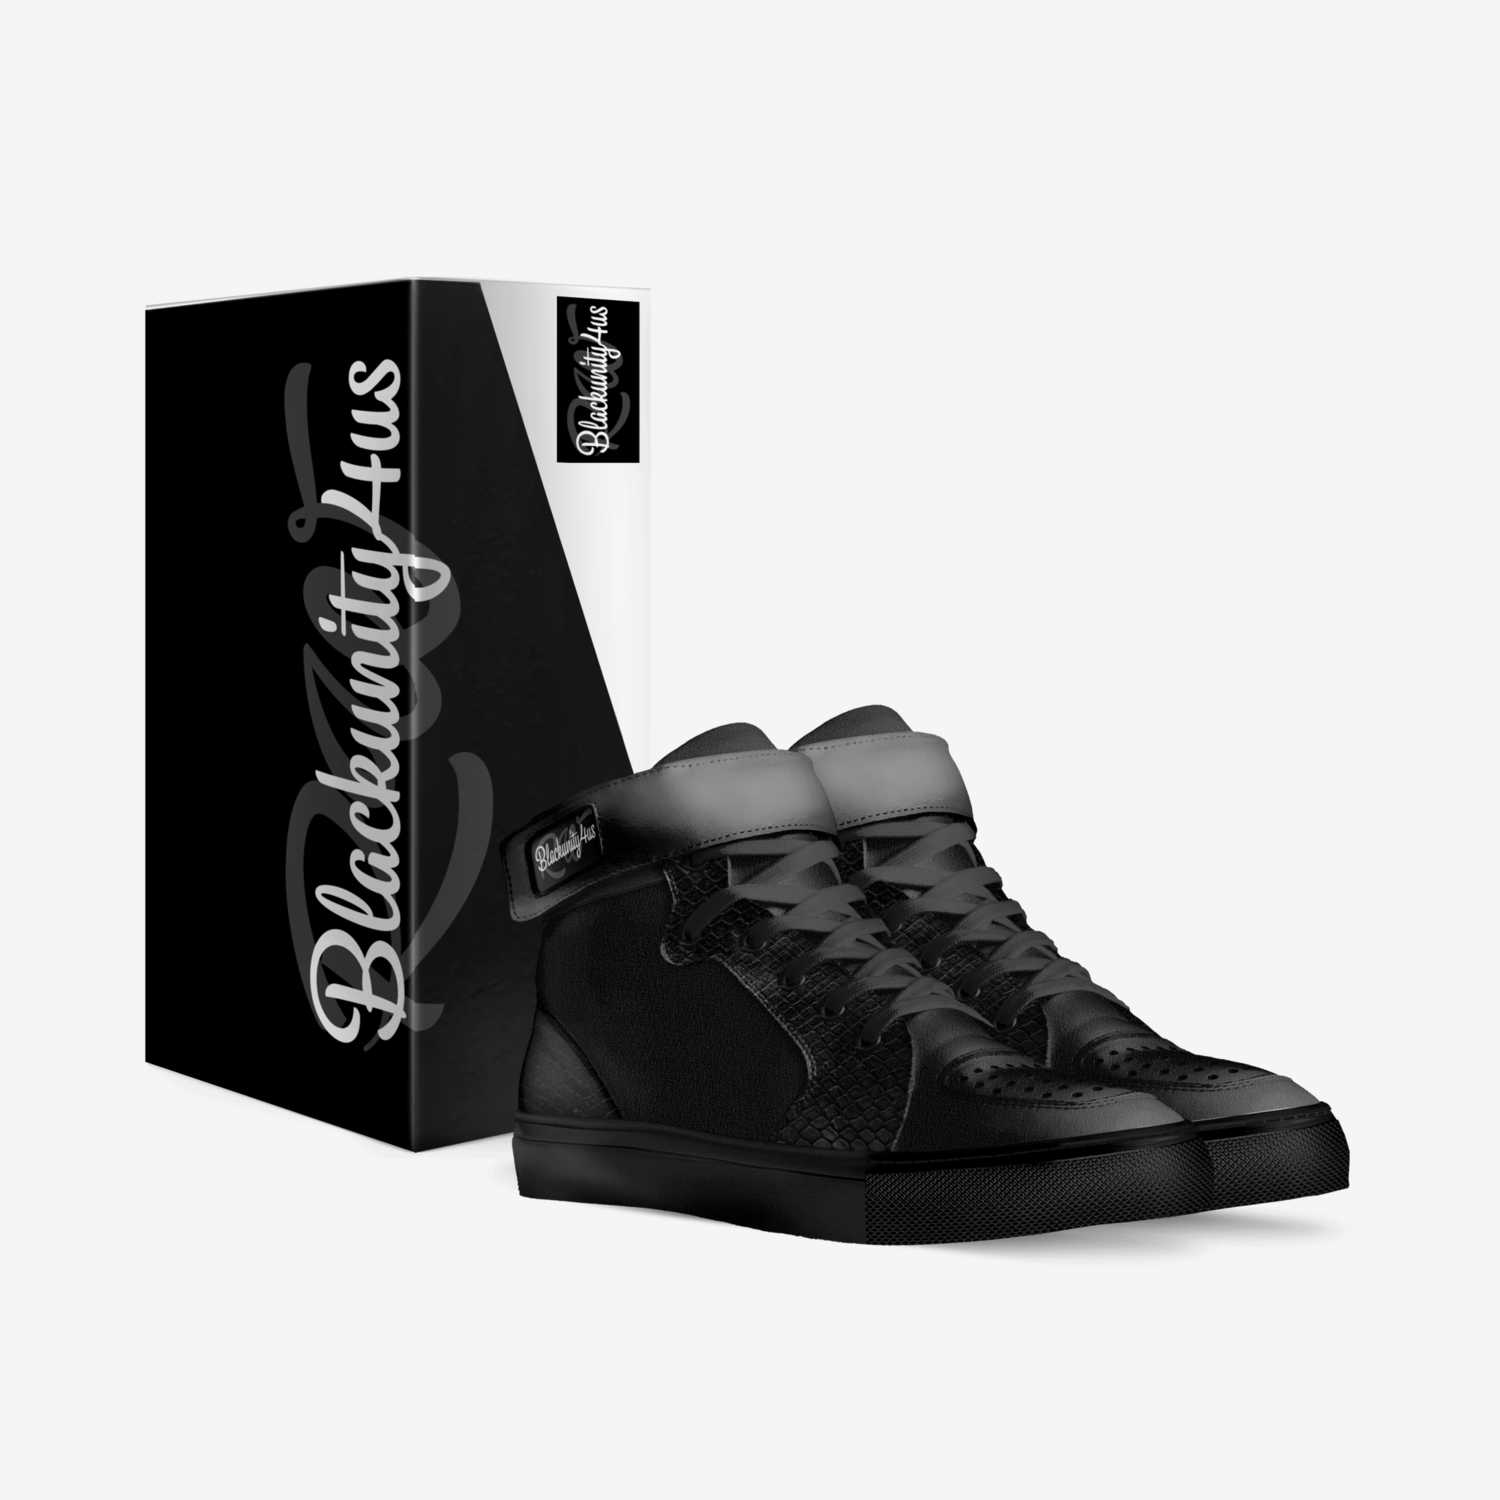 DarkNight custom made in Italy shoes by Raymond Wailes | Box view